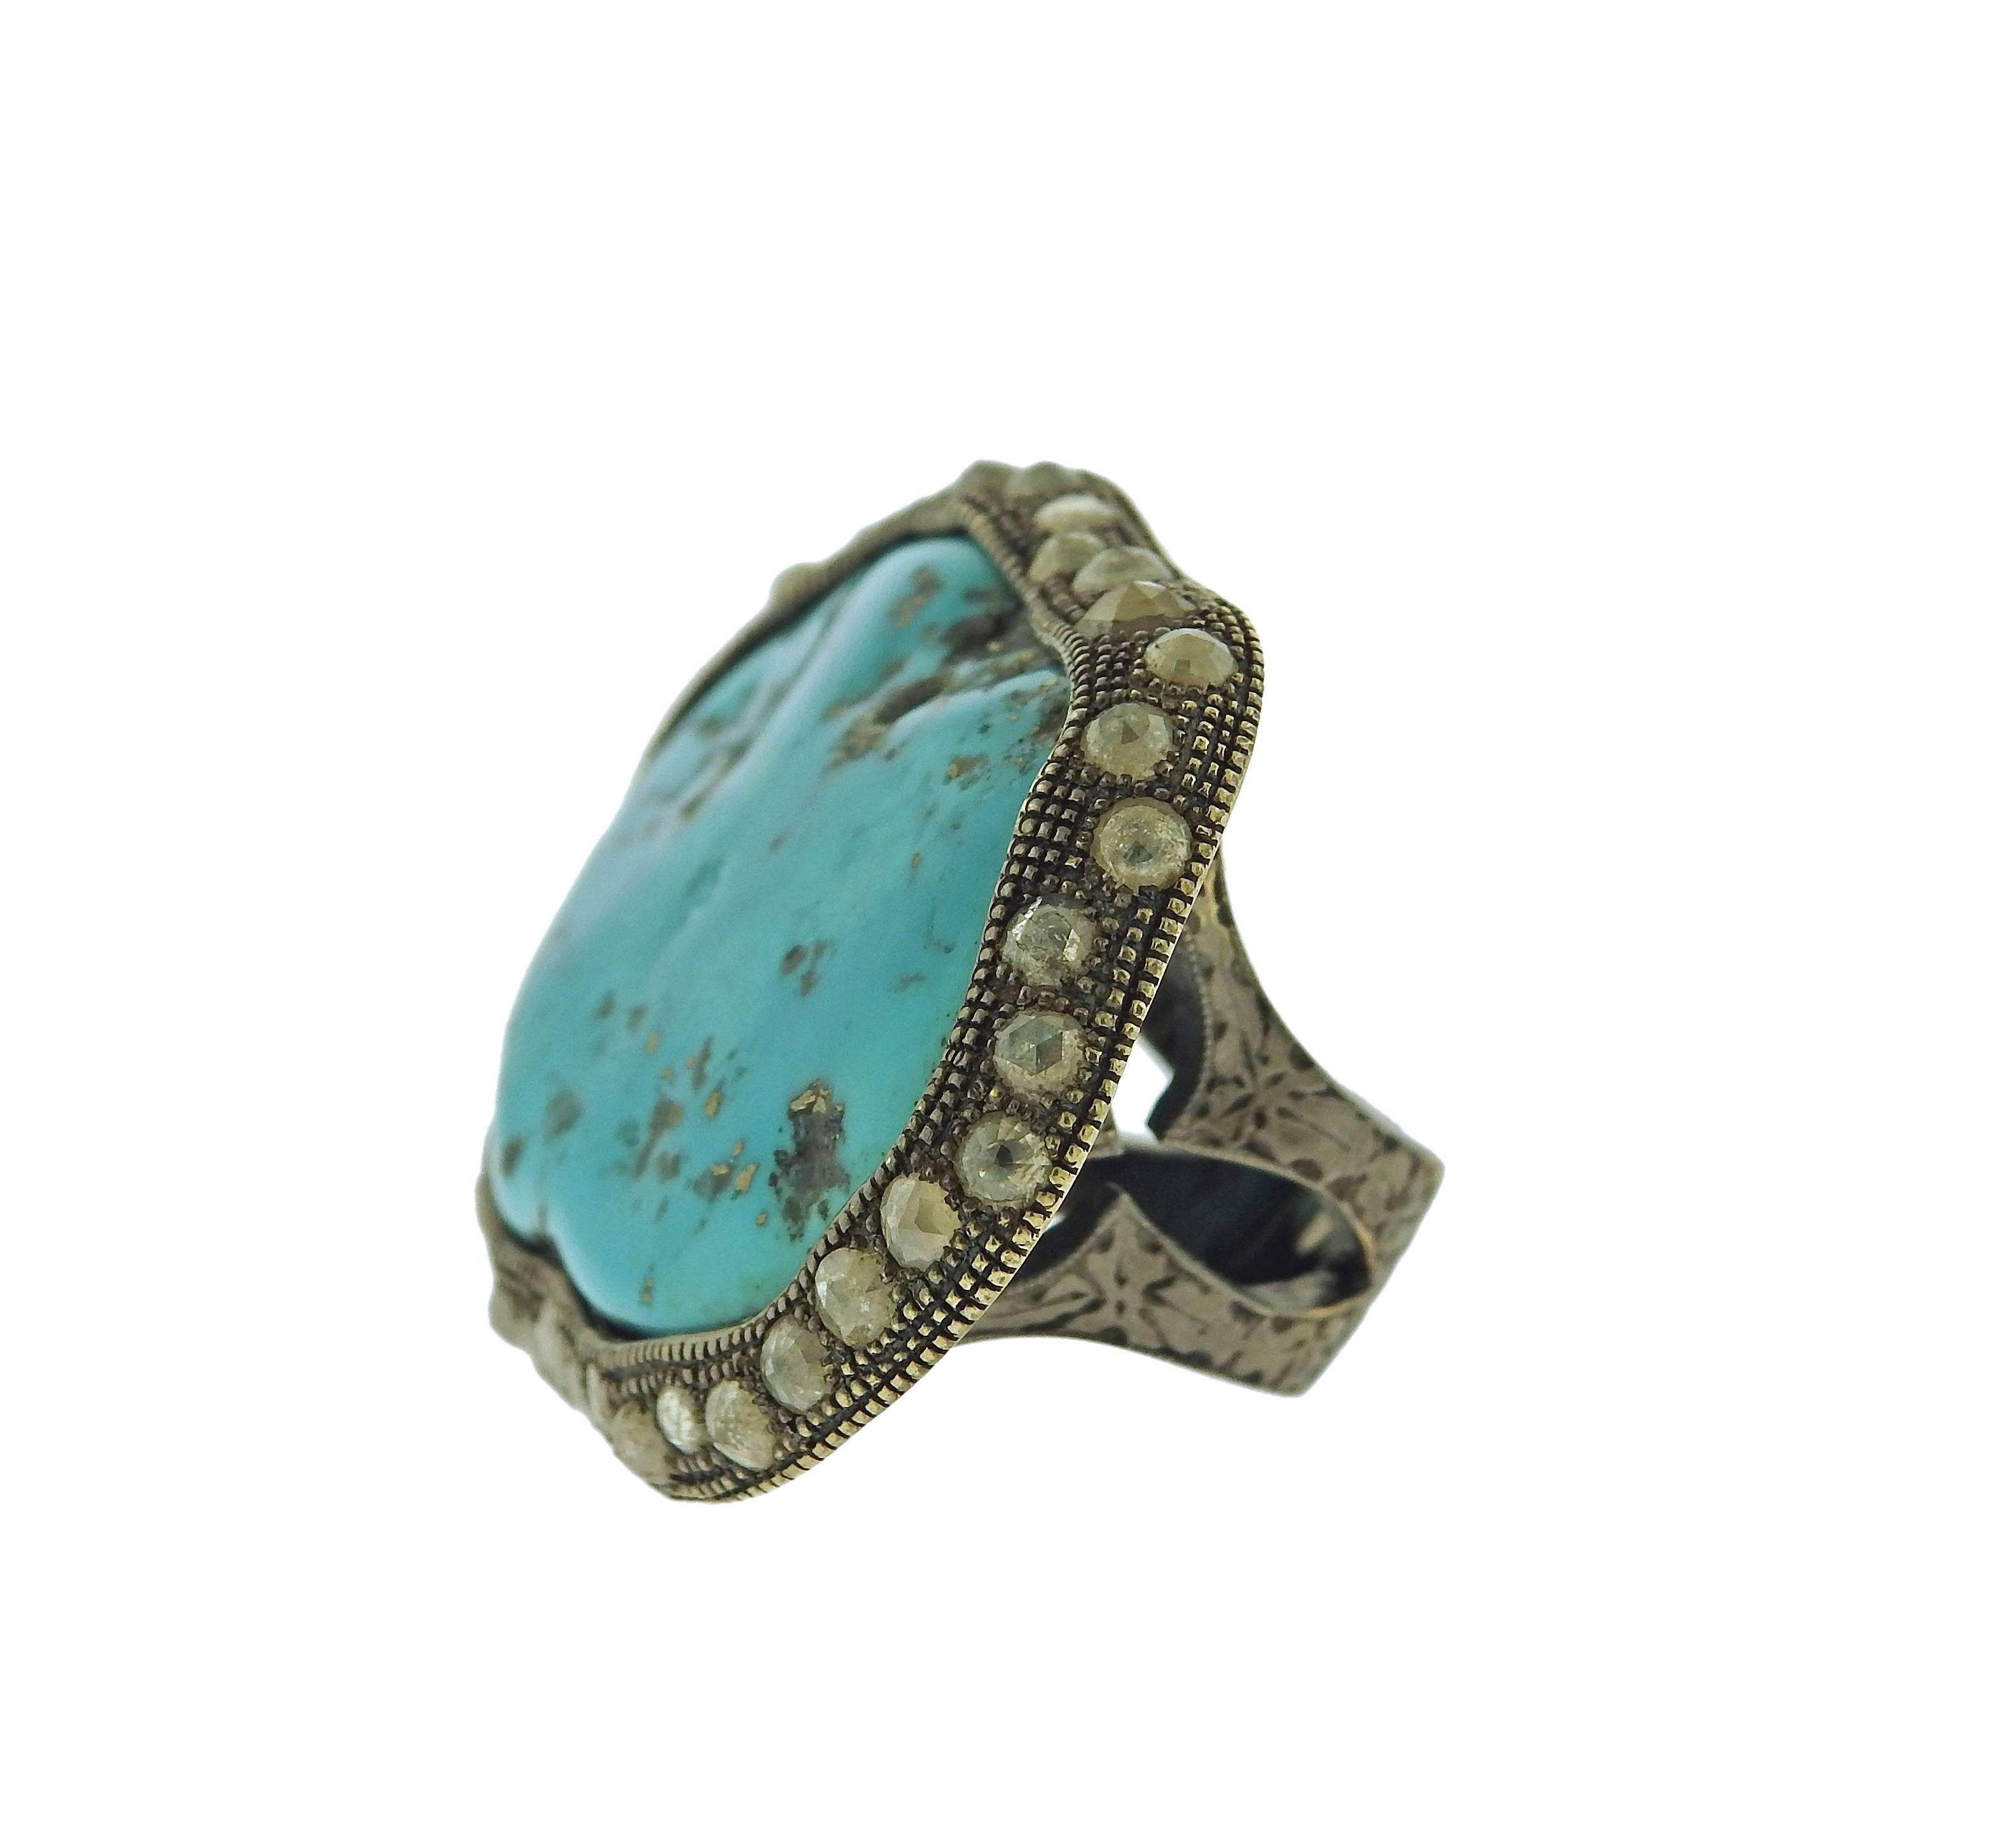 Large 18k blackened gold ring, crafted by Loree Rodkin, set with turquoise, surrounded with rose cut diamonds. Ring size - 7, ring top is 35mm x 49mm , weight - 45.6 grams. Marked:L R , 18k